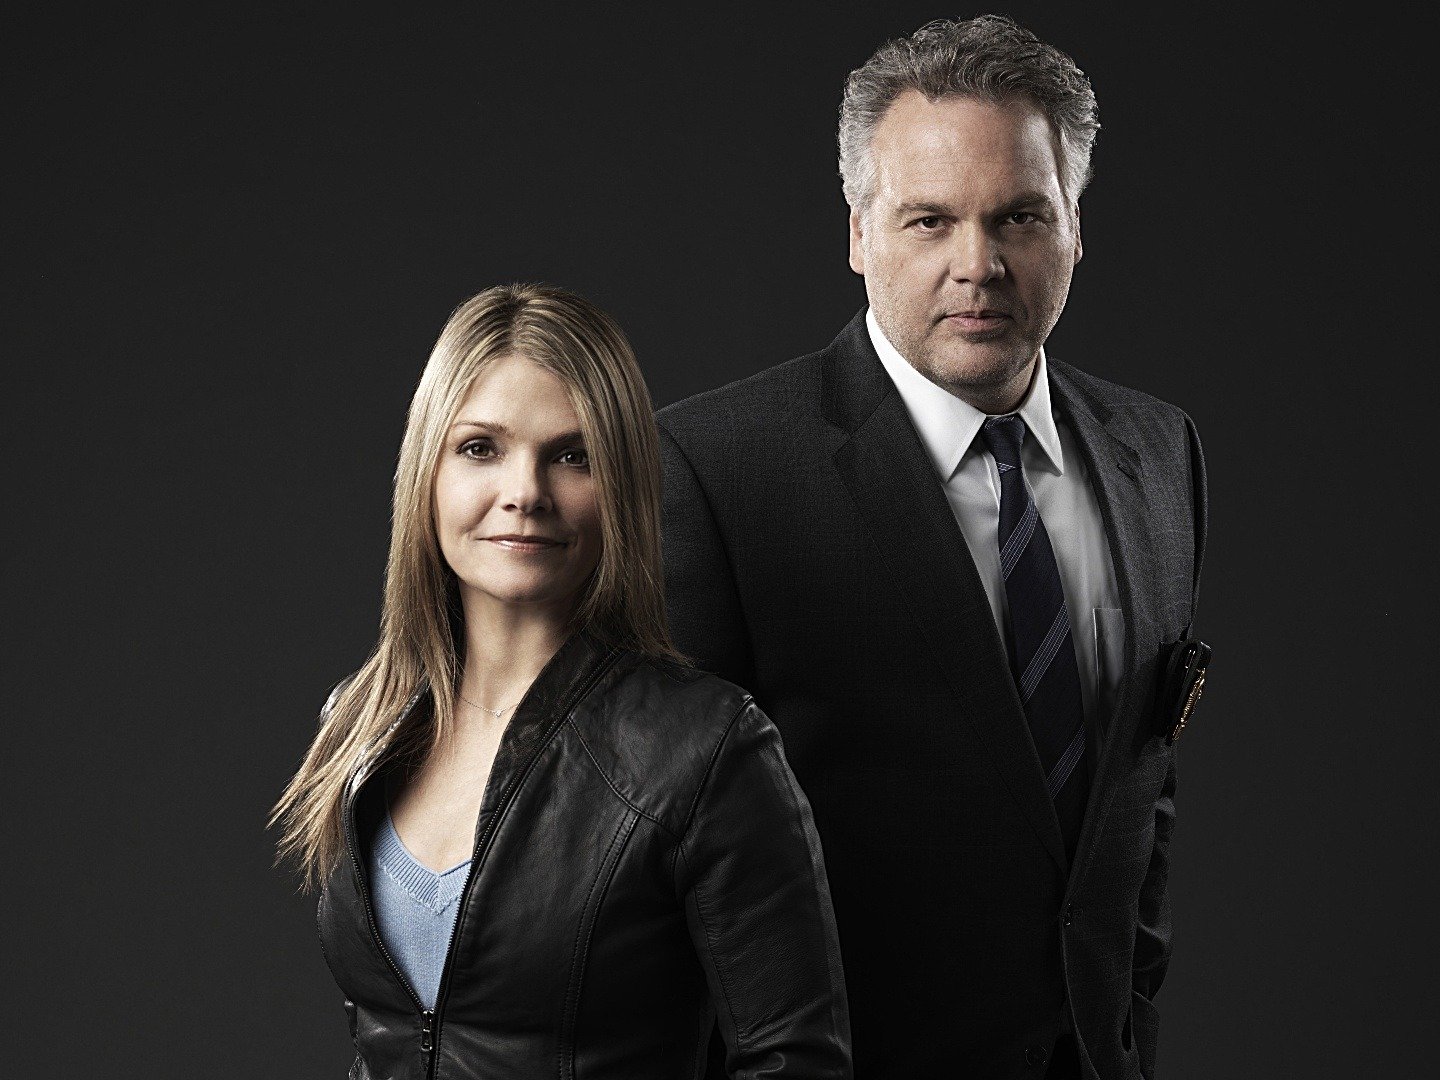 Law & Order Criminal Intent on TV Season 9 Episode 1 Channels and